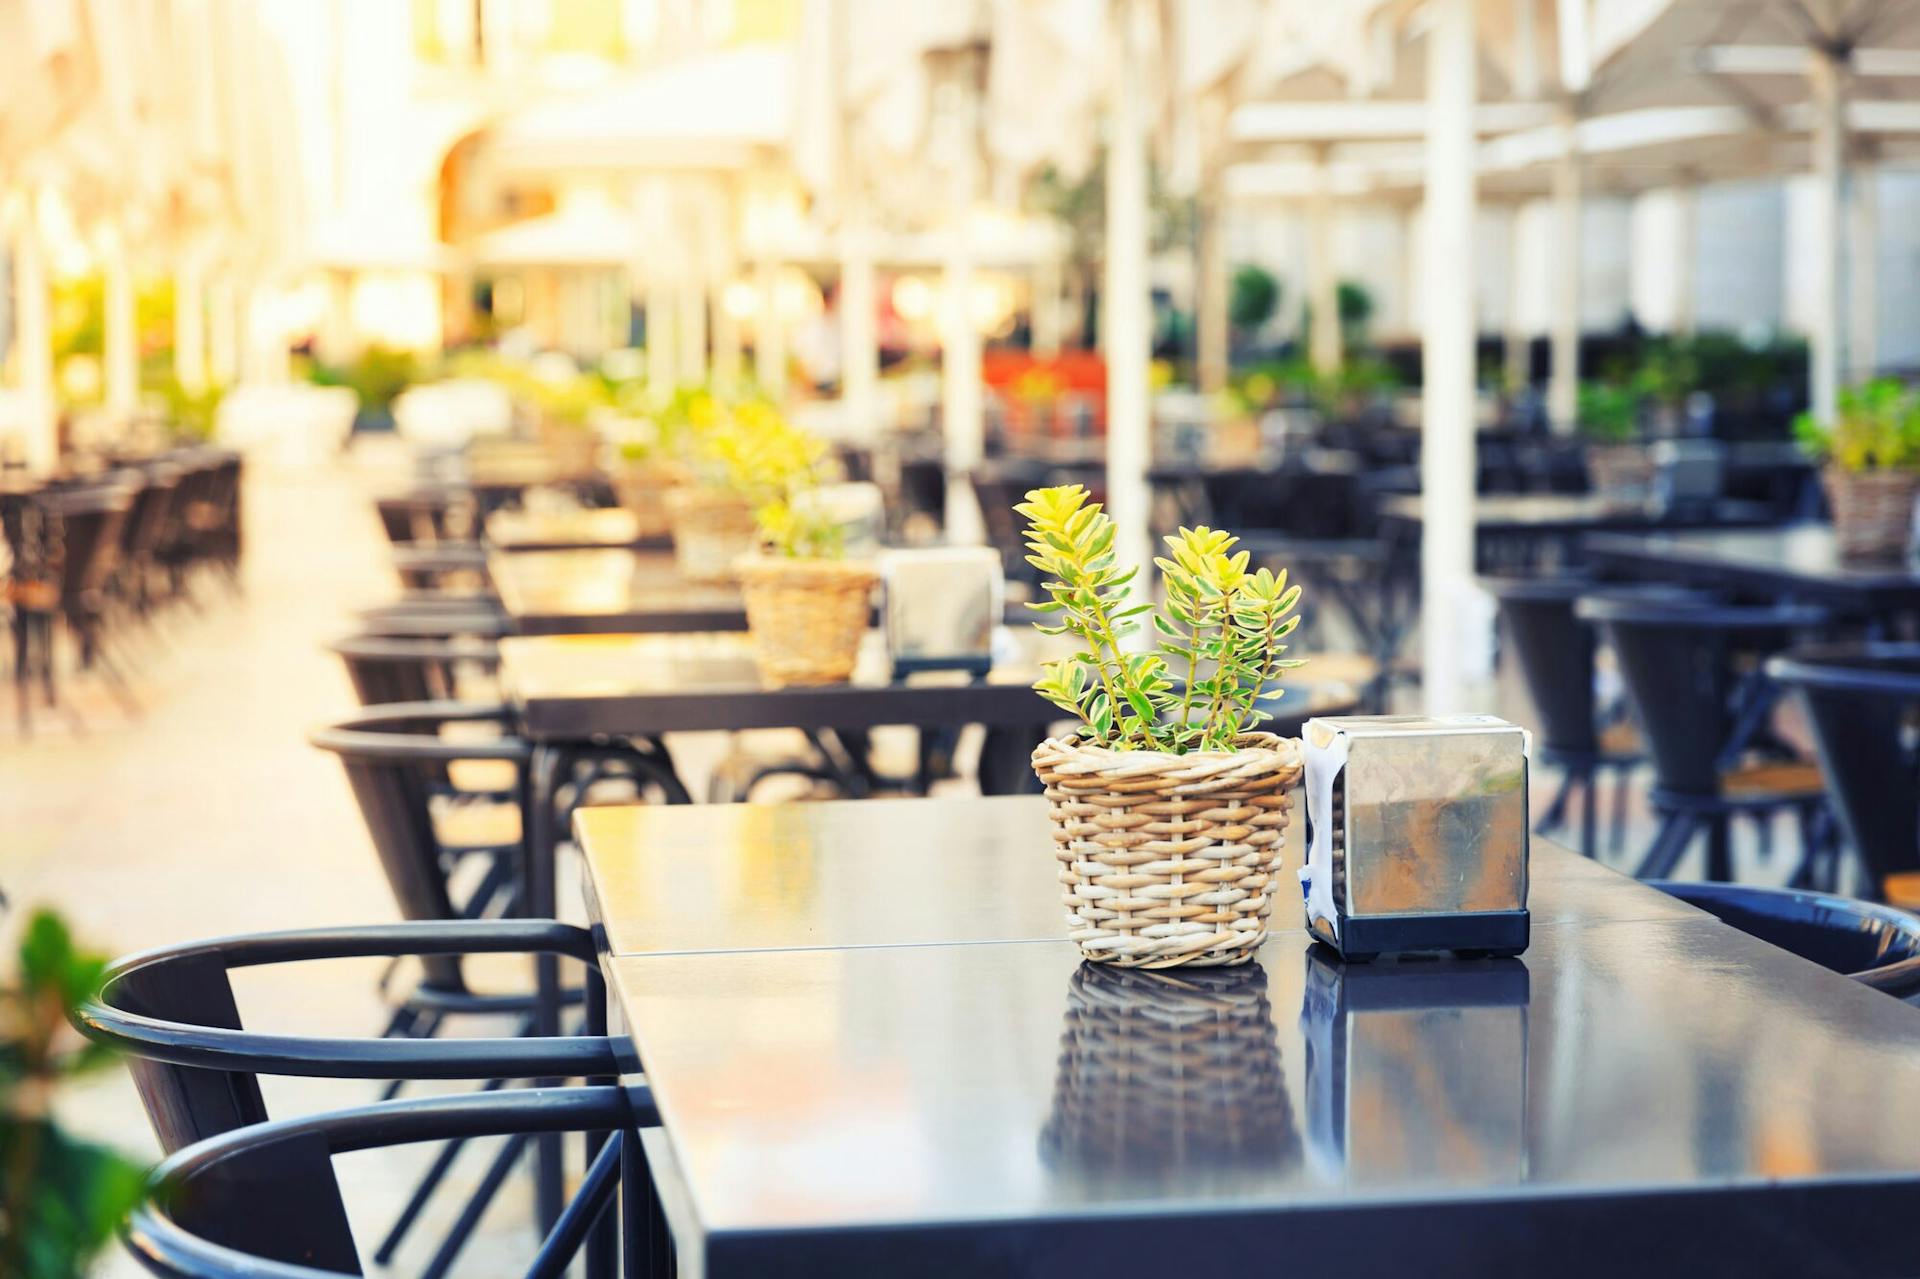 How To Optimize Your Restaurant Seating Layout and Table Management Strategy For COVID-19